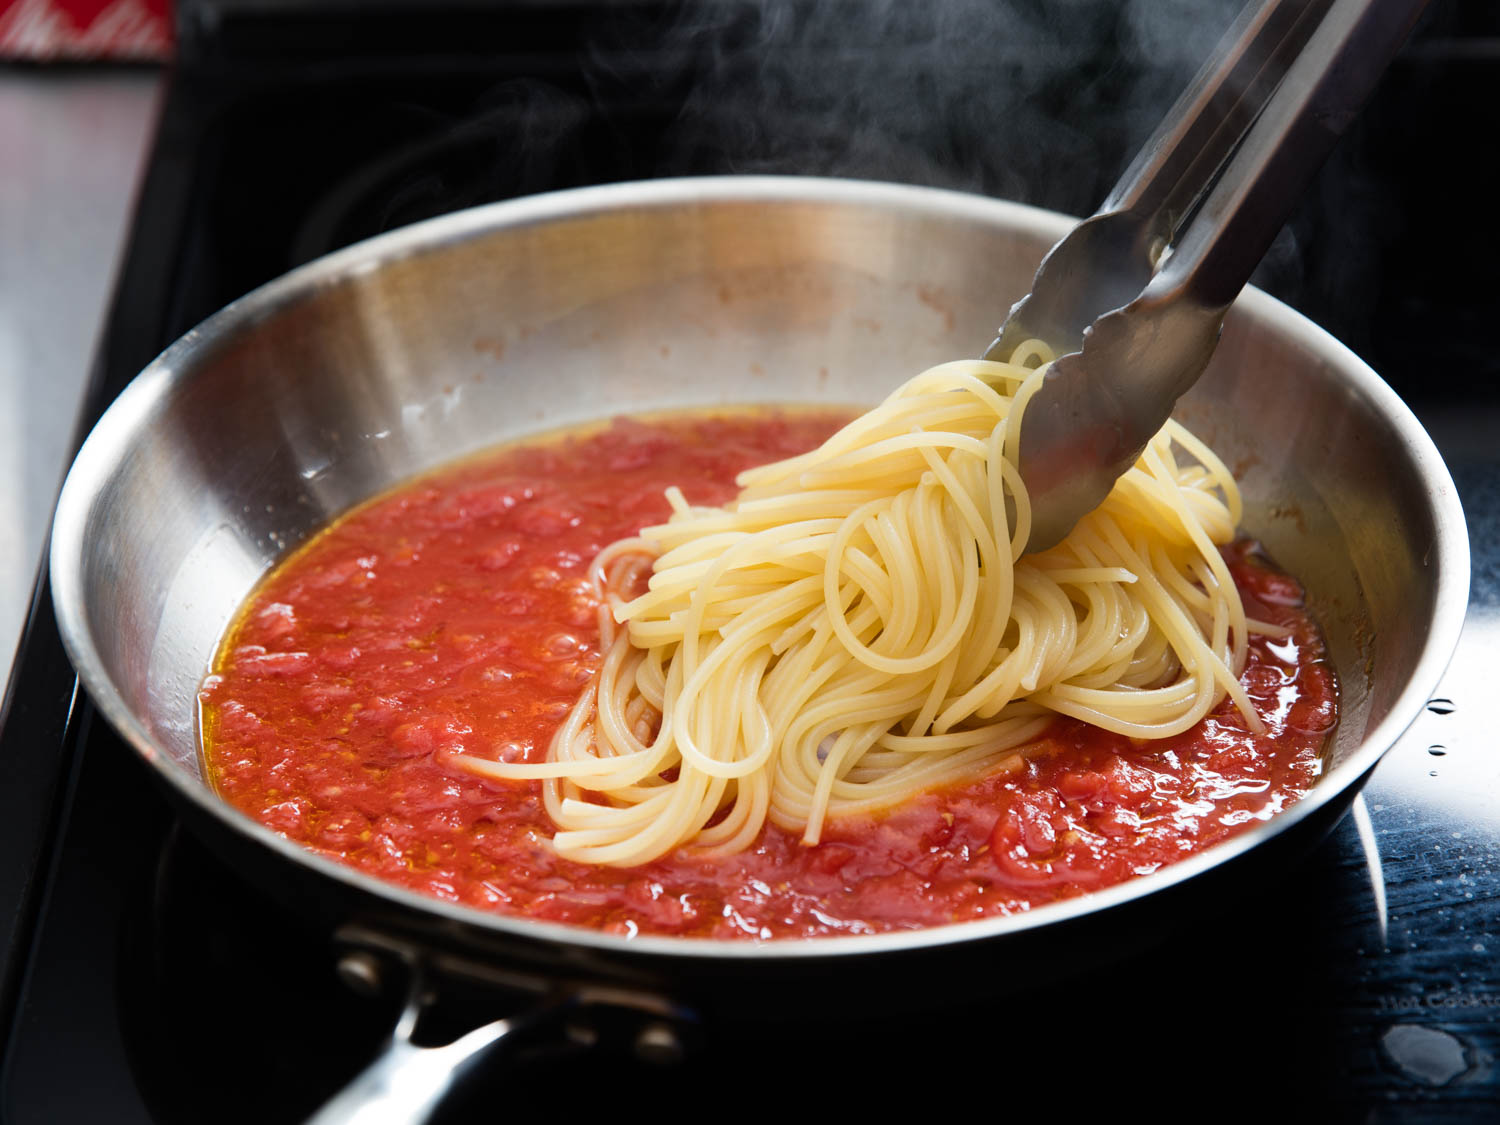 Settle These Food Debates and We’ll Guess Which Three Foods You Love the Most tossing pasta in sauce